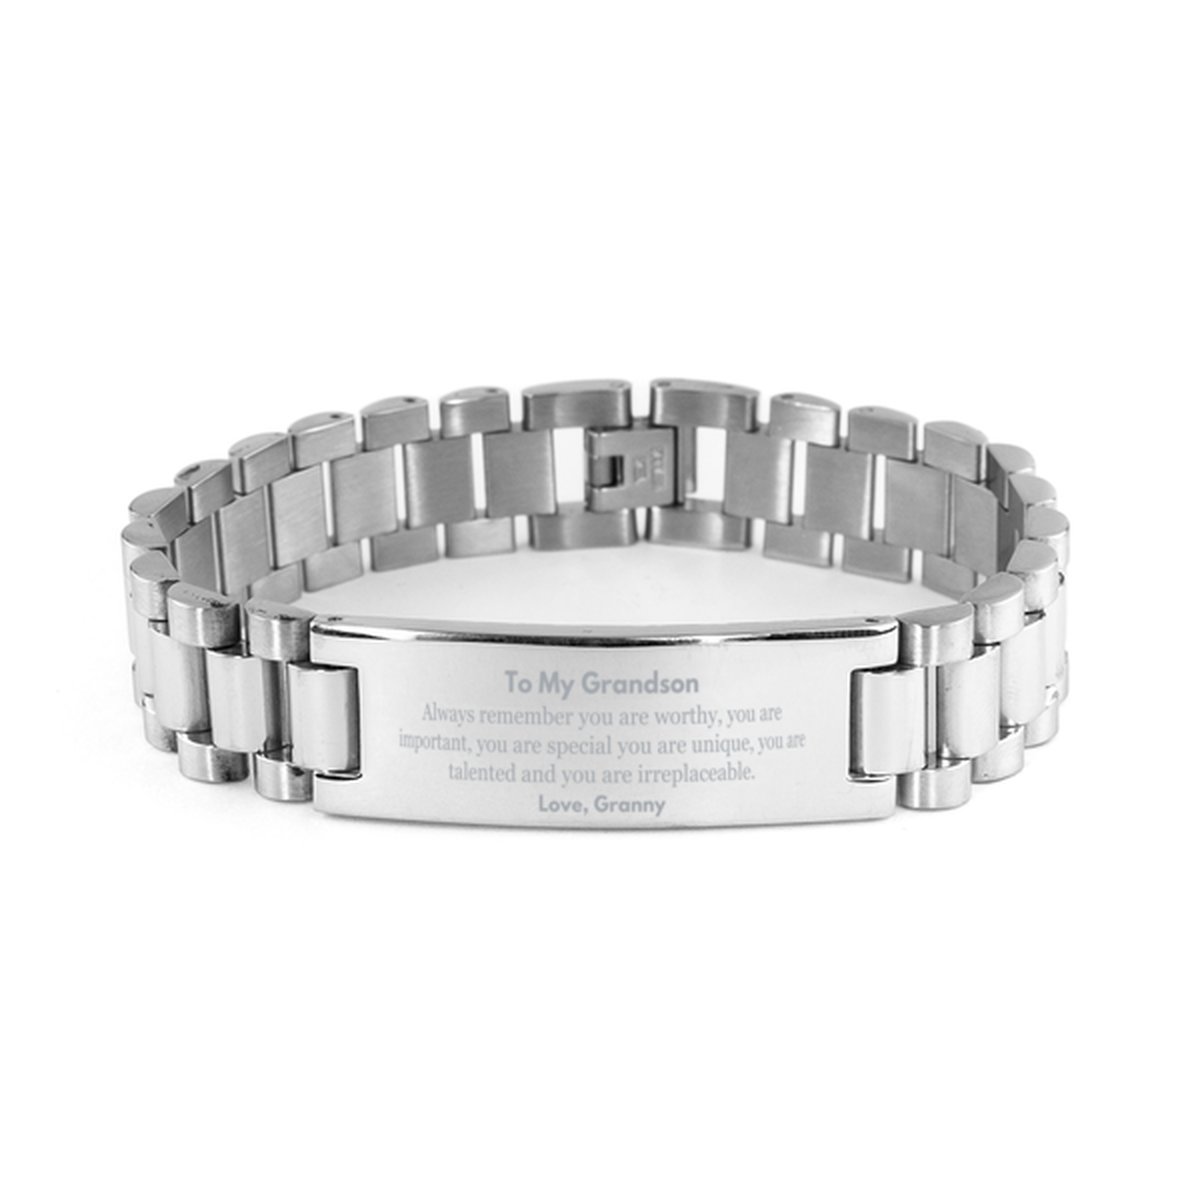 Grandson Birthday Gifts from Granny, Inspirational Ladder Stainless Steel Bracelet for Grandson Christmas Graduation Gifts for Grandson Always remember you are worthy, you are important. Love, Granny